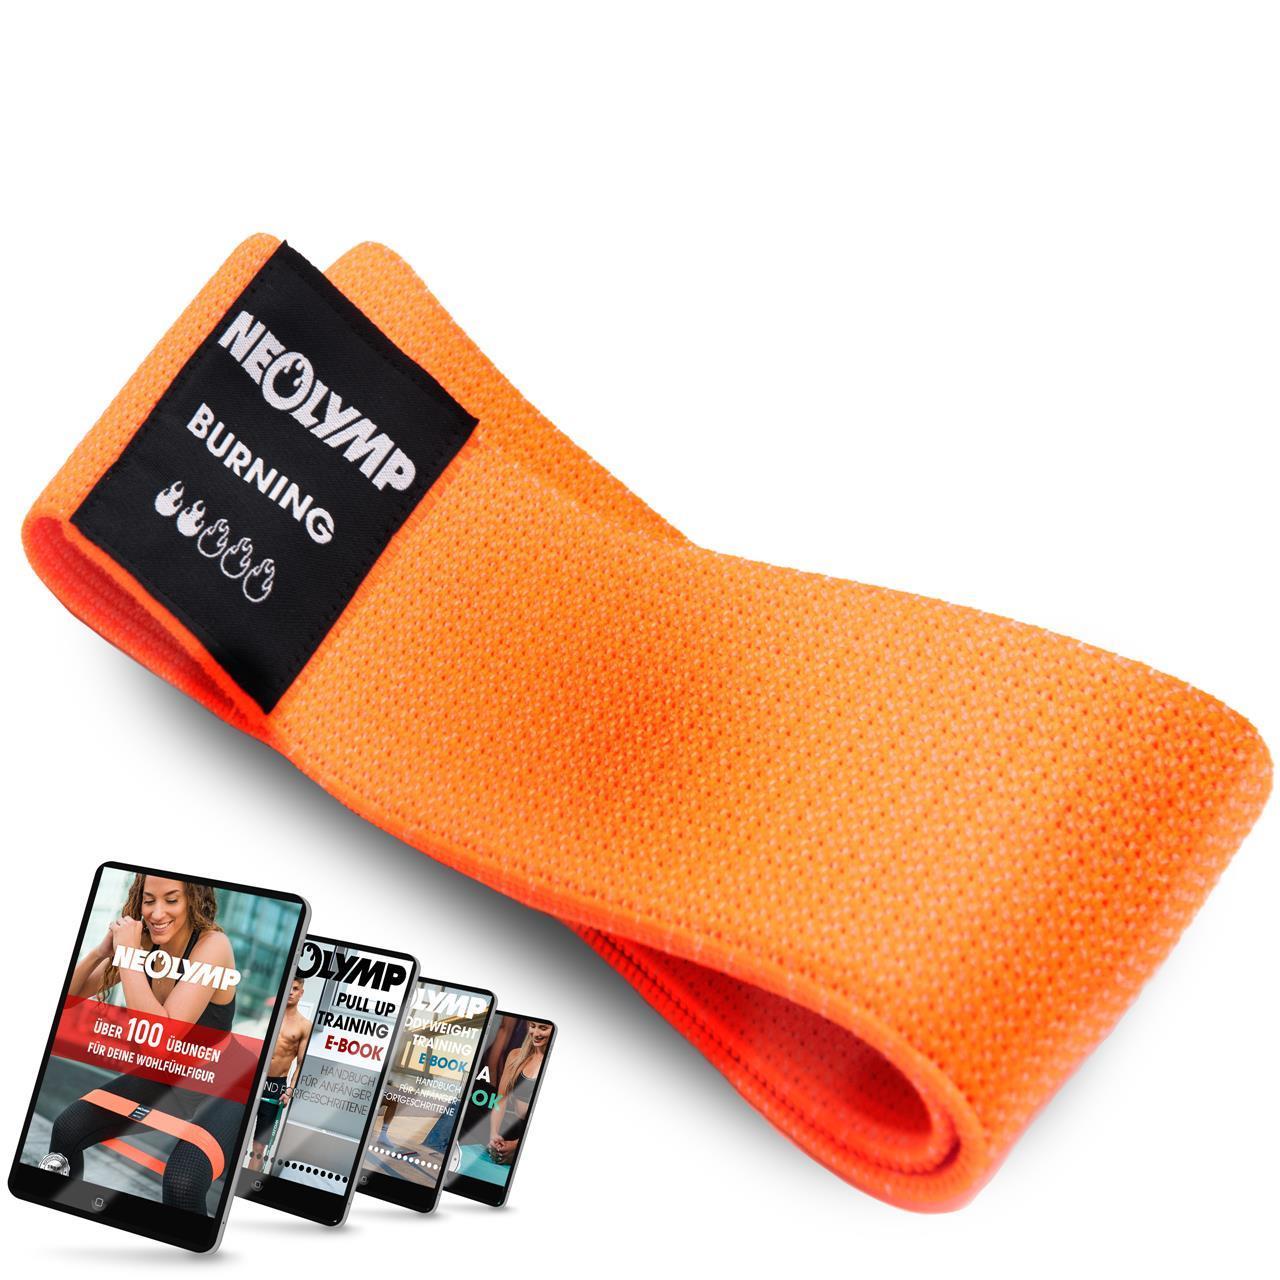 Short fabric fitness bands (levels 1-5)